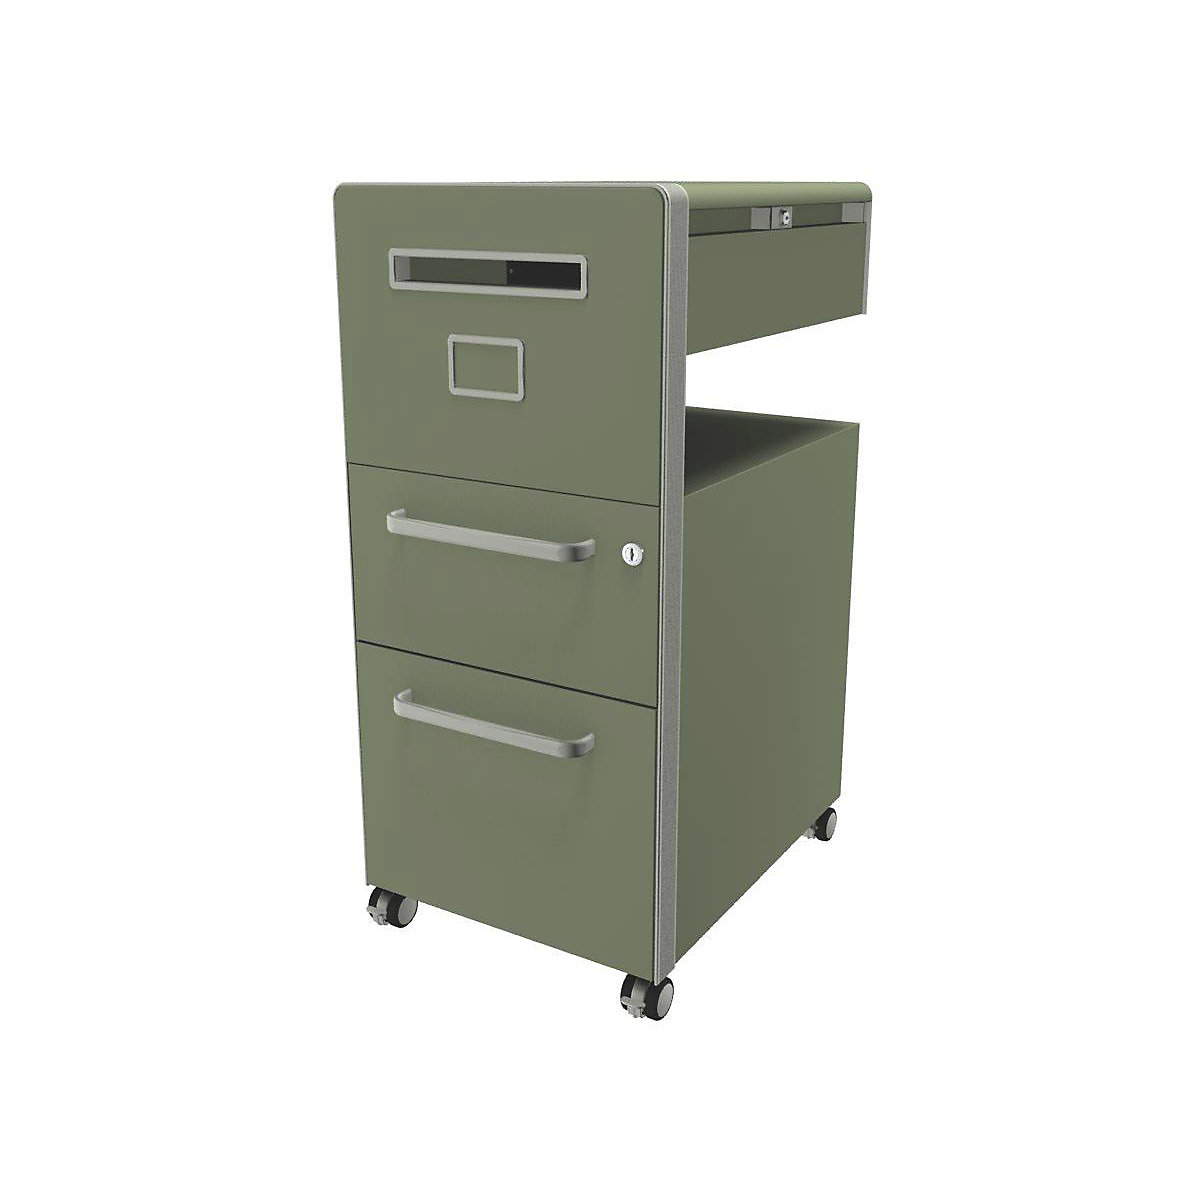 Bite™ pedestal furniture, with 1 pin board, opens on the left side – BISLEY, with 1 universal drawer, 1 suspension file drawer, regent-33